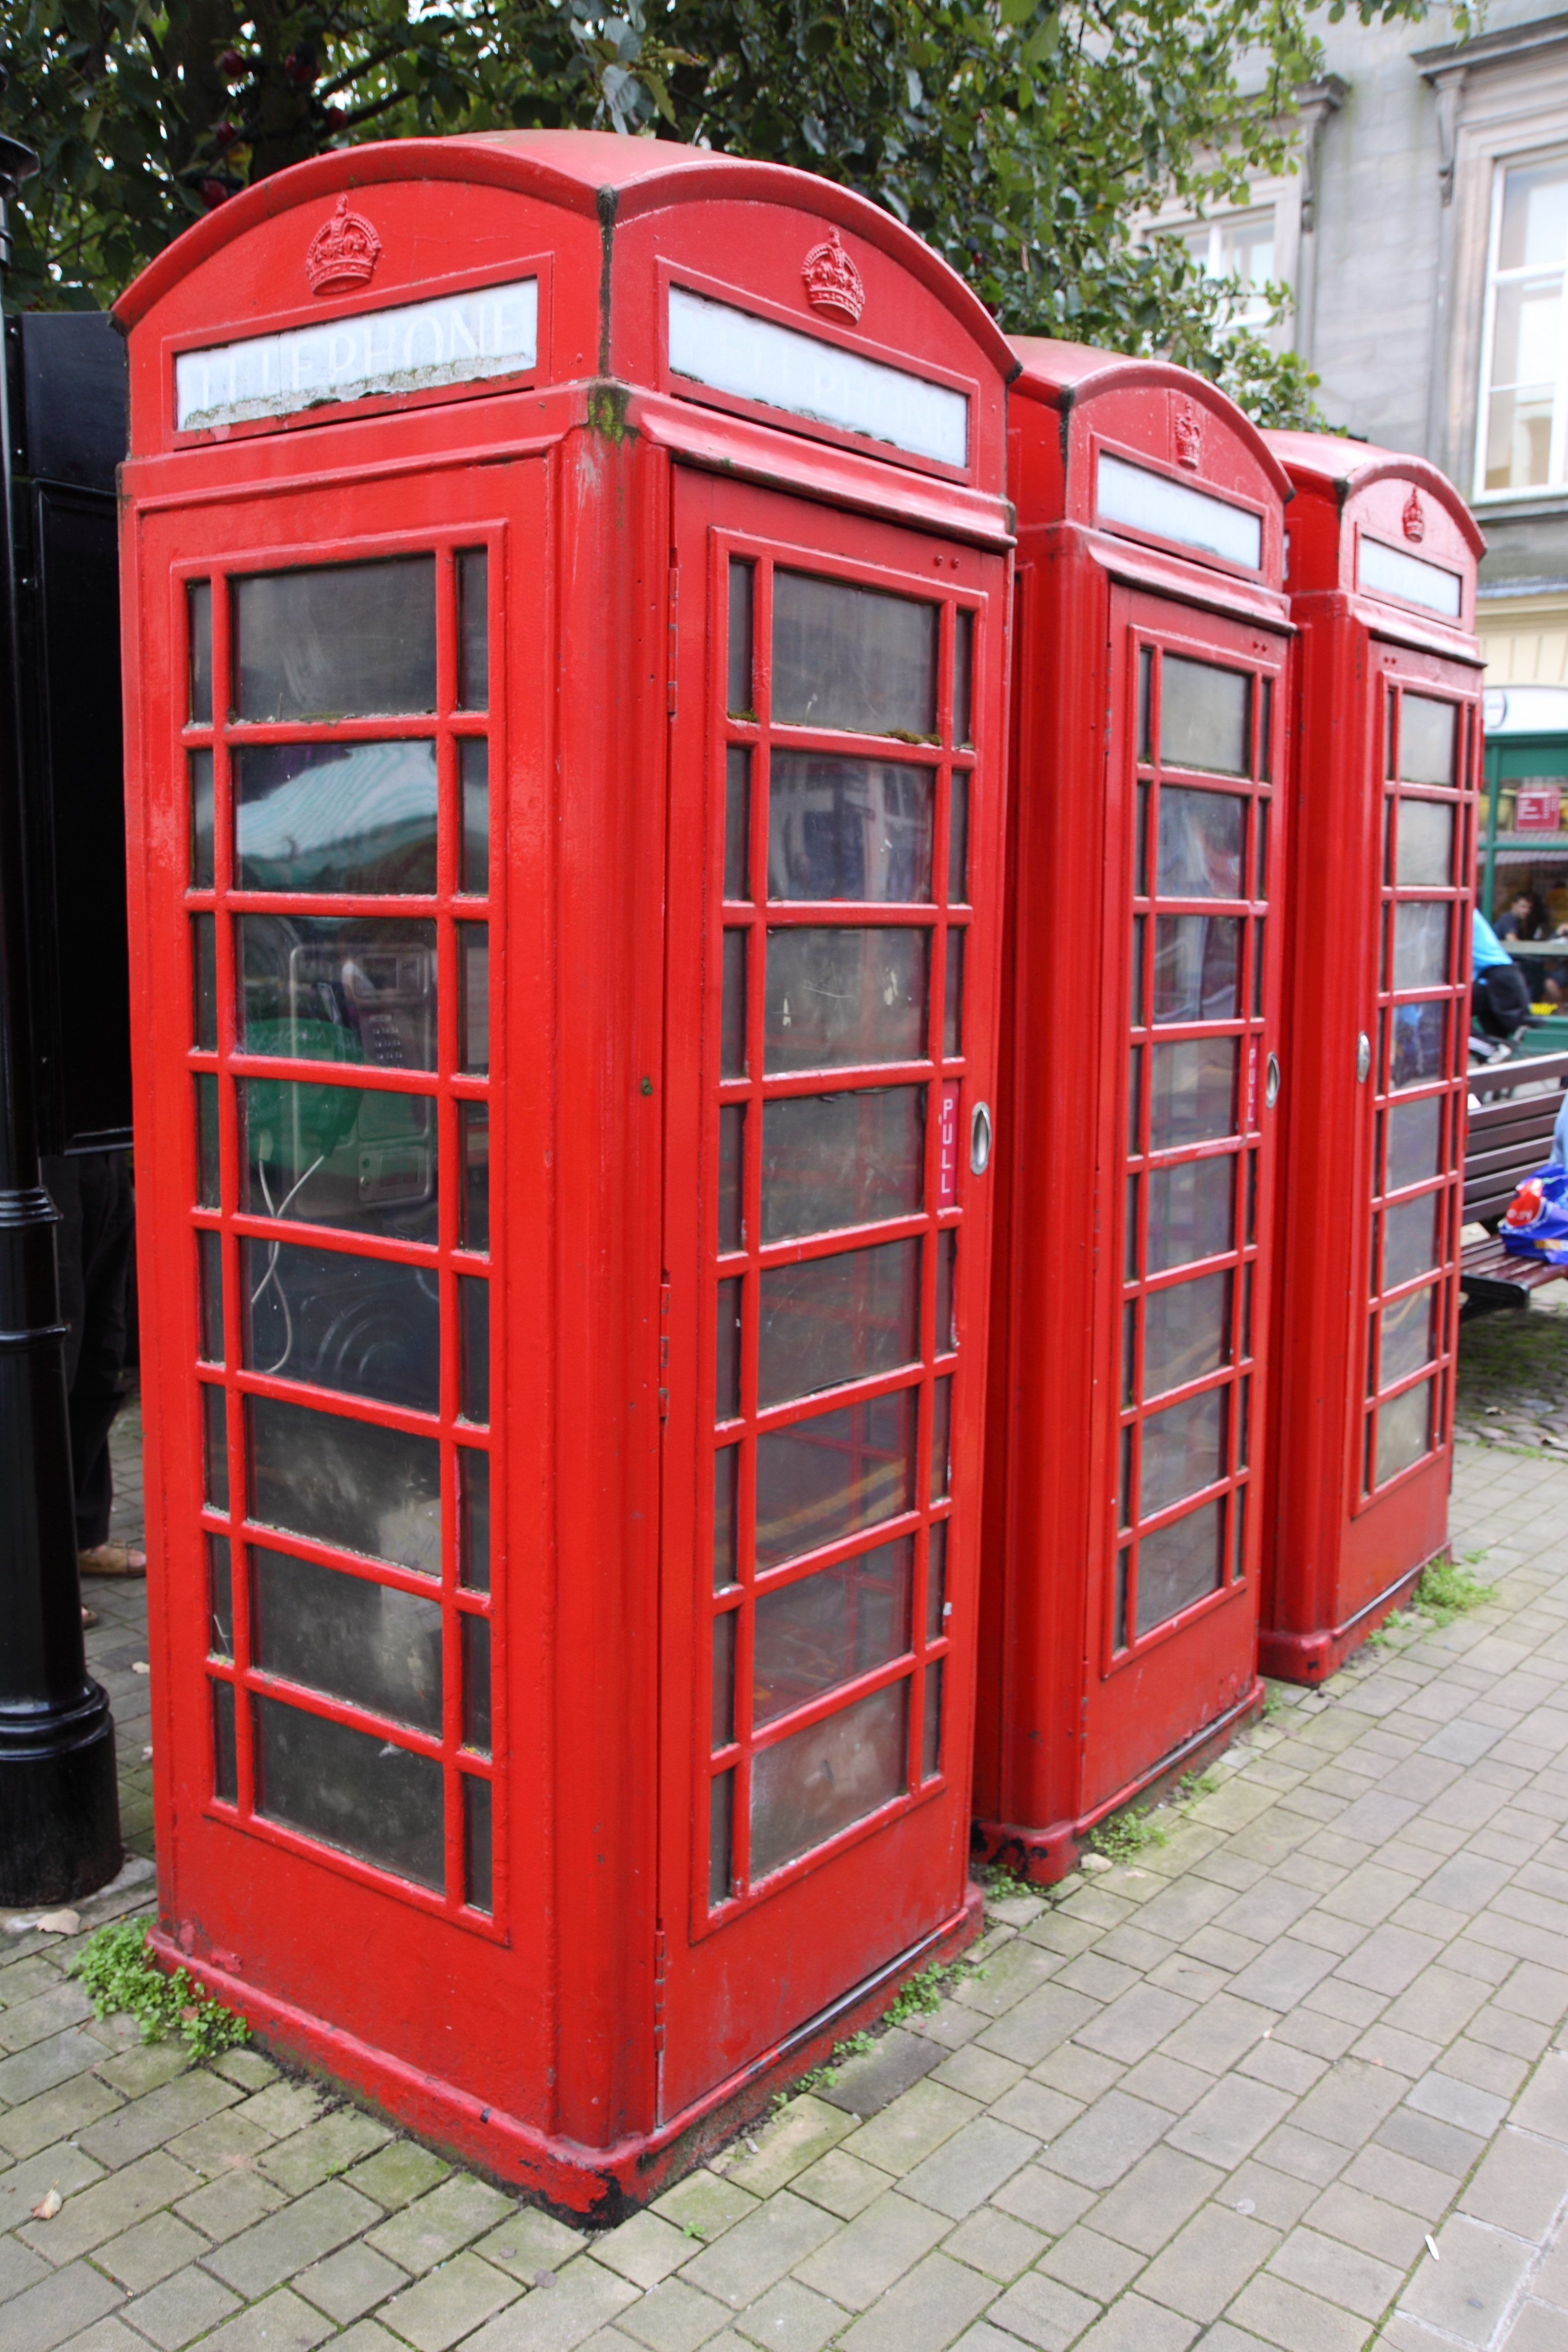 3 red telephone booths